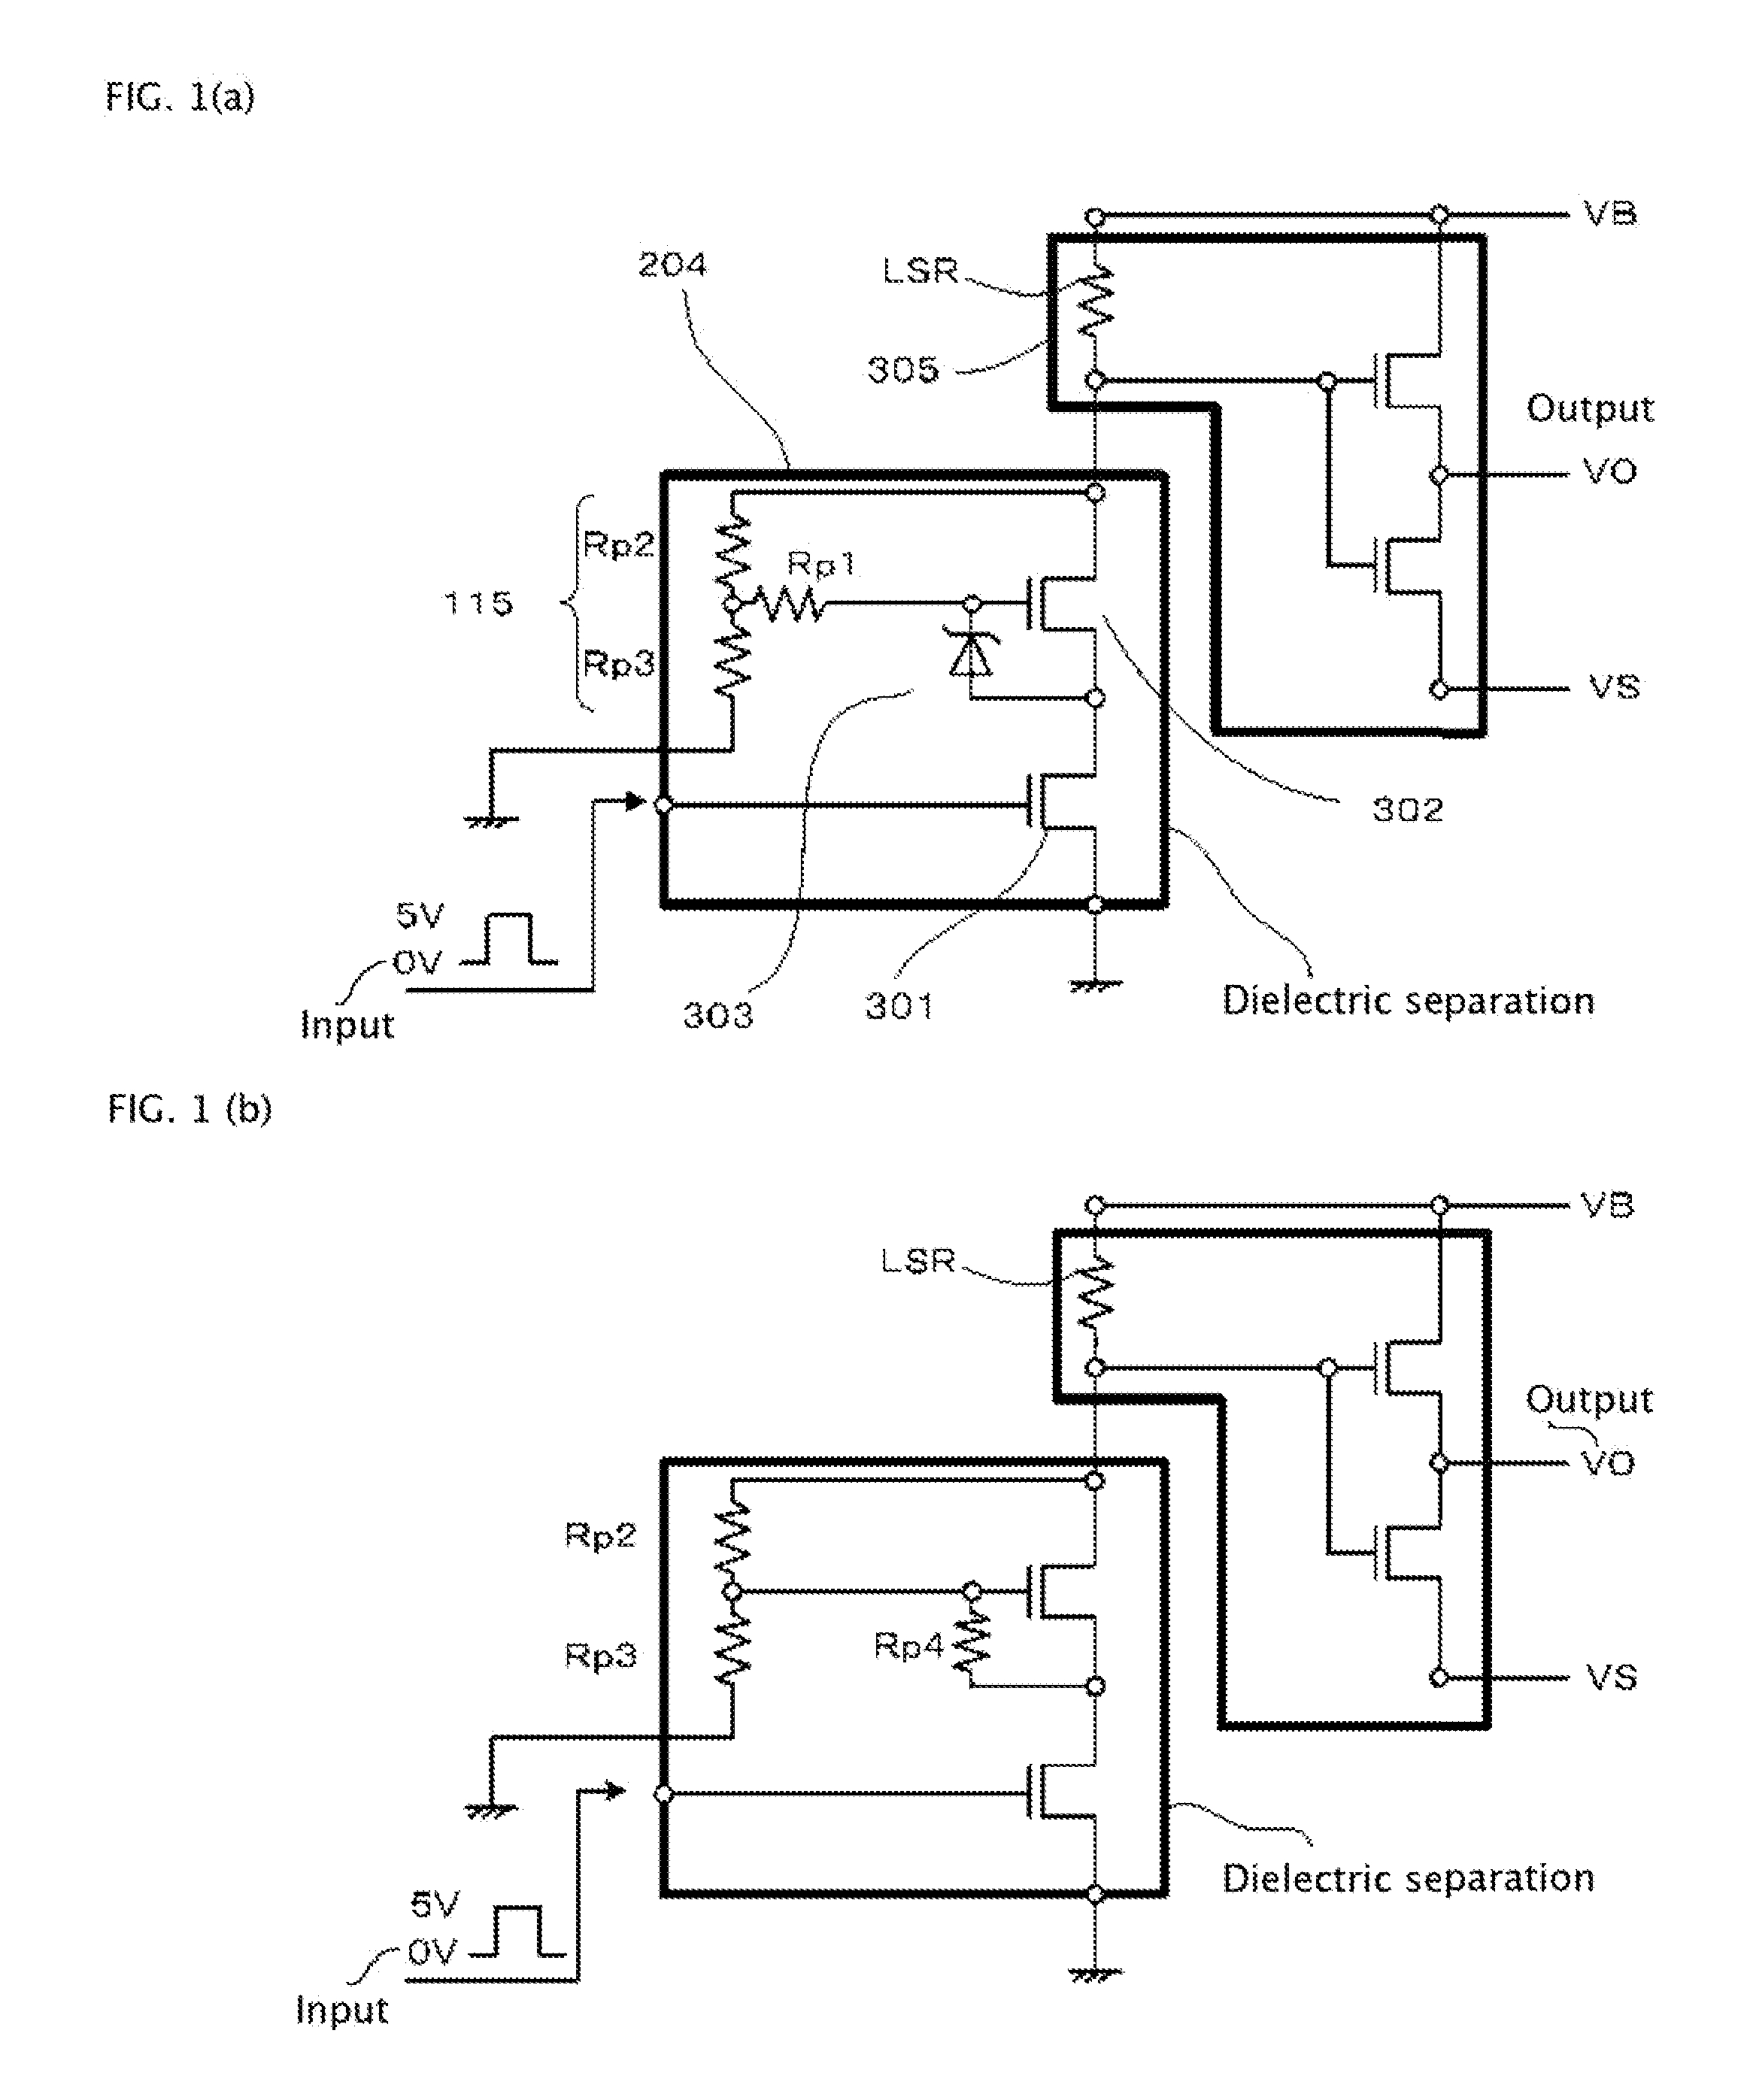 High-voltage semiconductor device